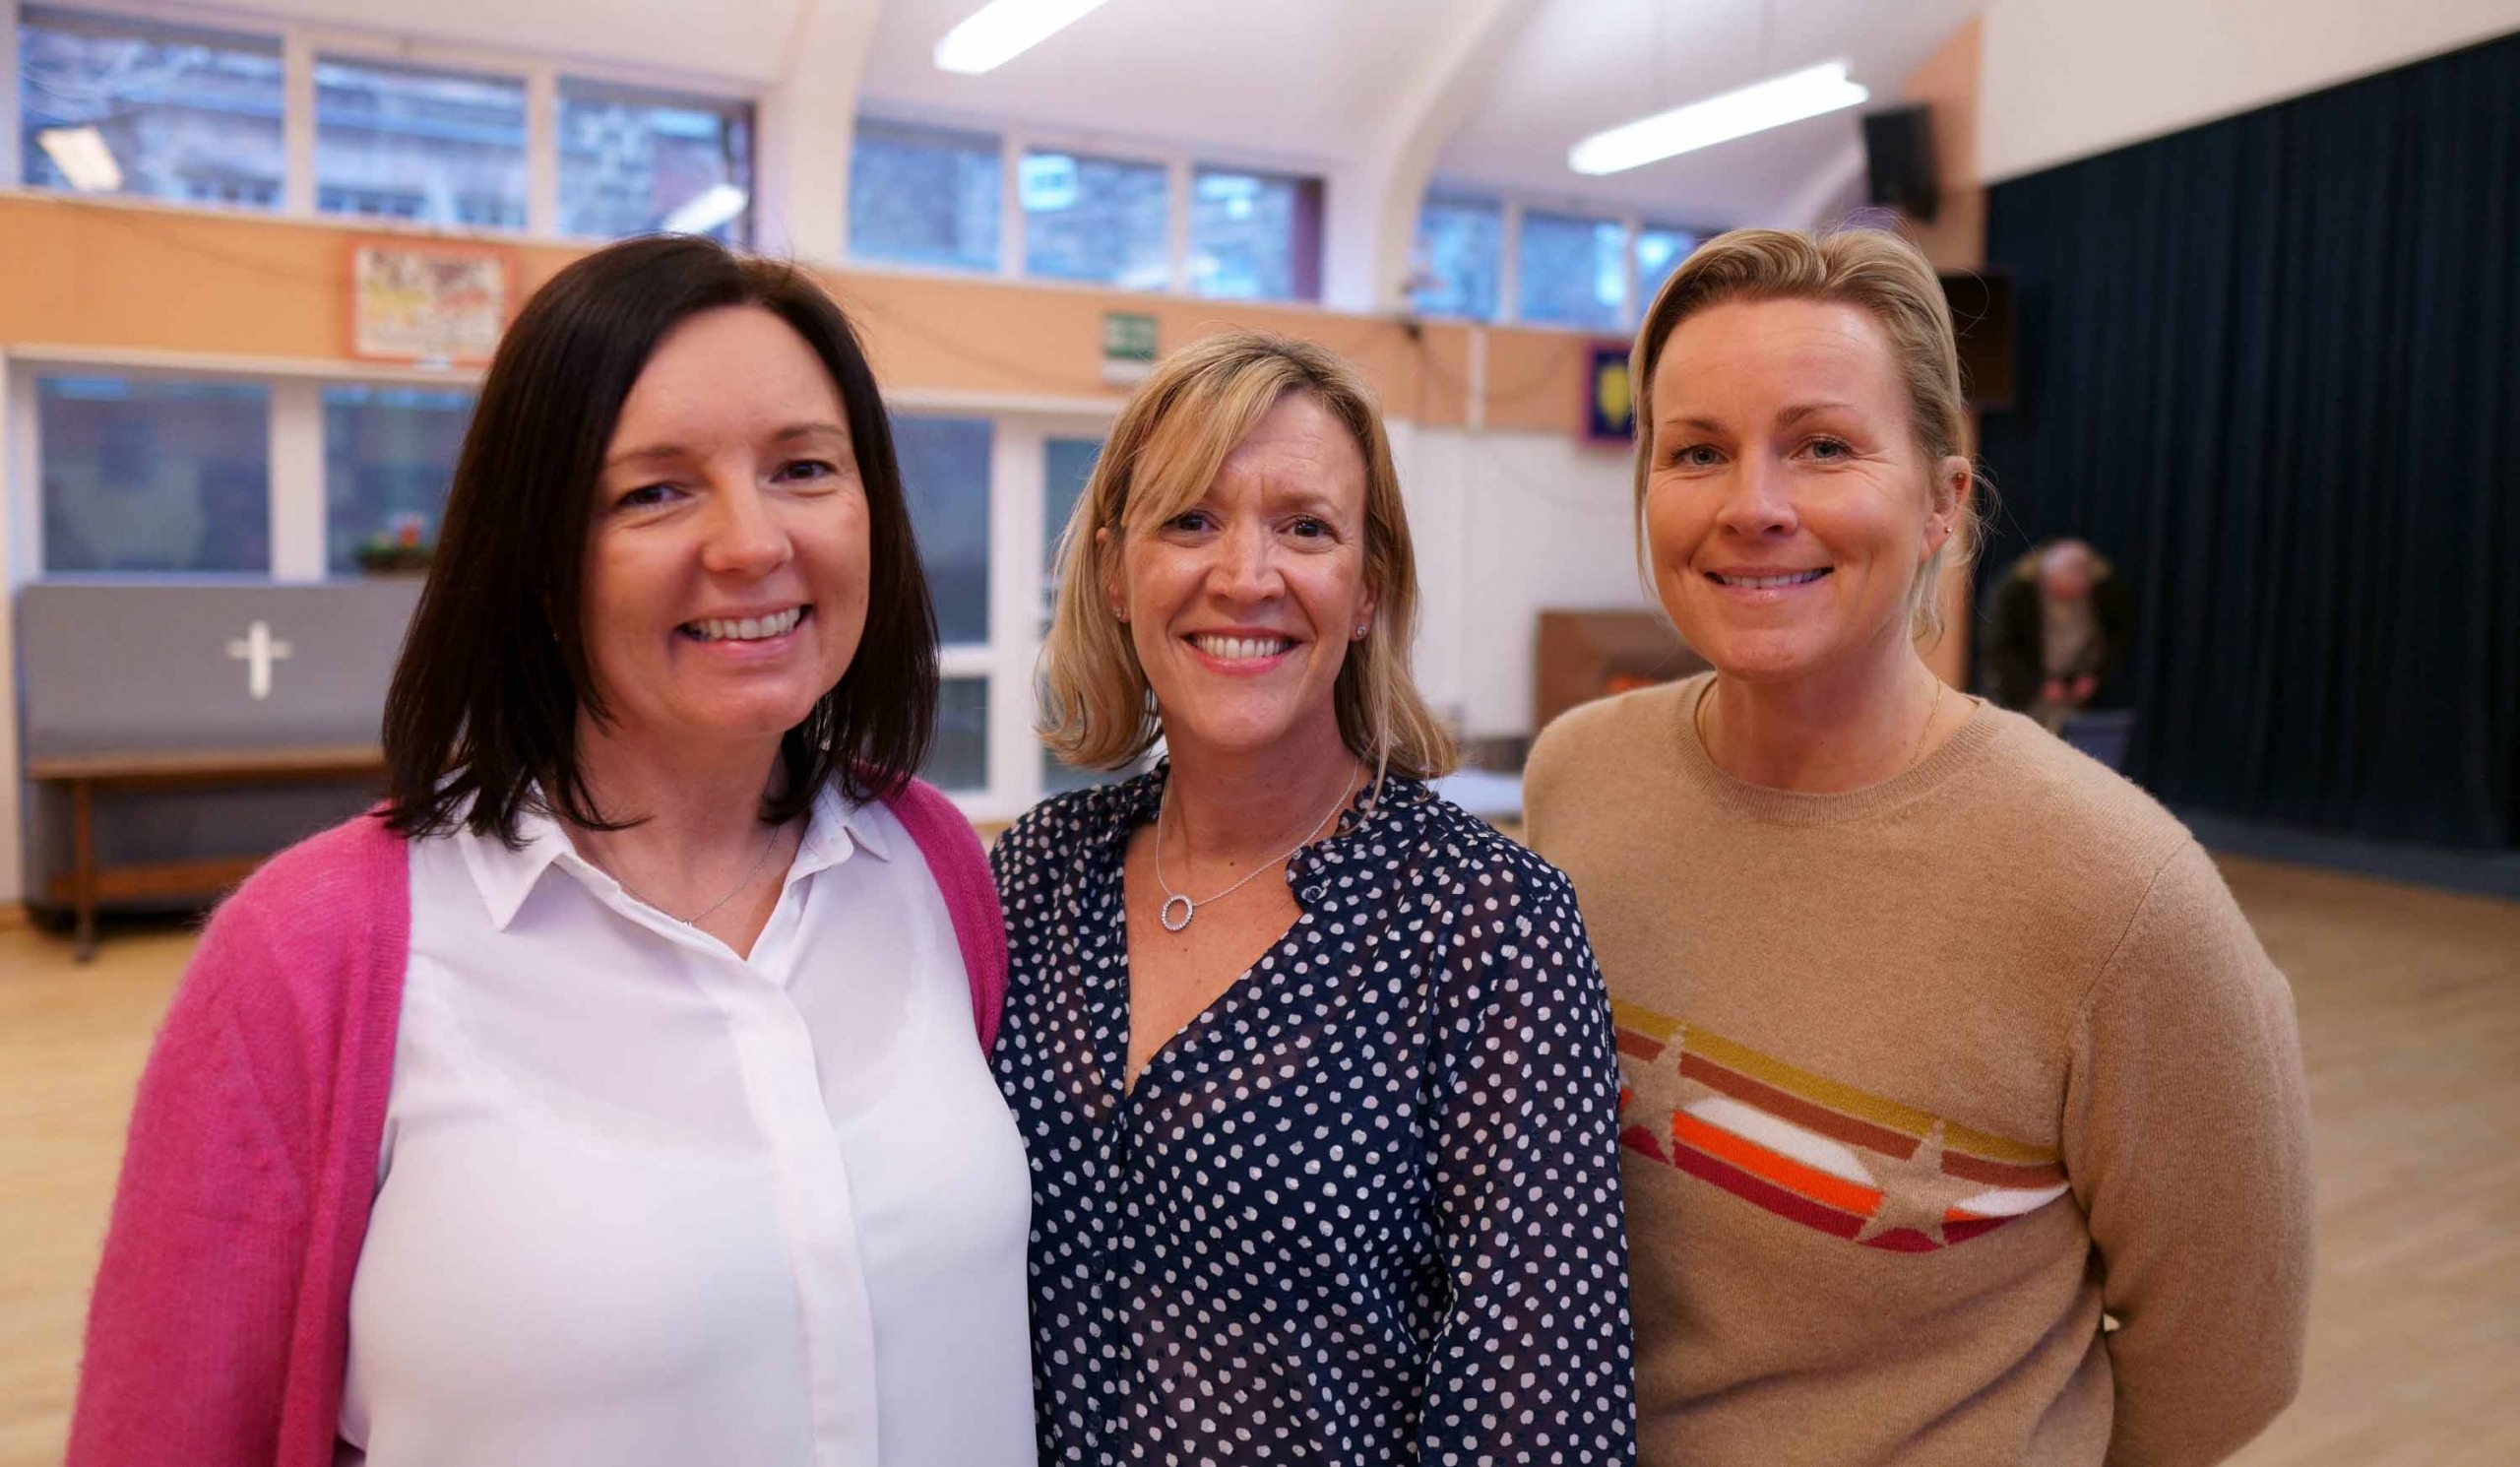 Victoria Amella, Lizzie Turner and Claire Coxon - The Wellbeing Cafe, St Luke's Church, Harrogate